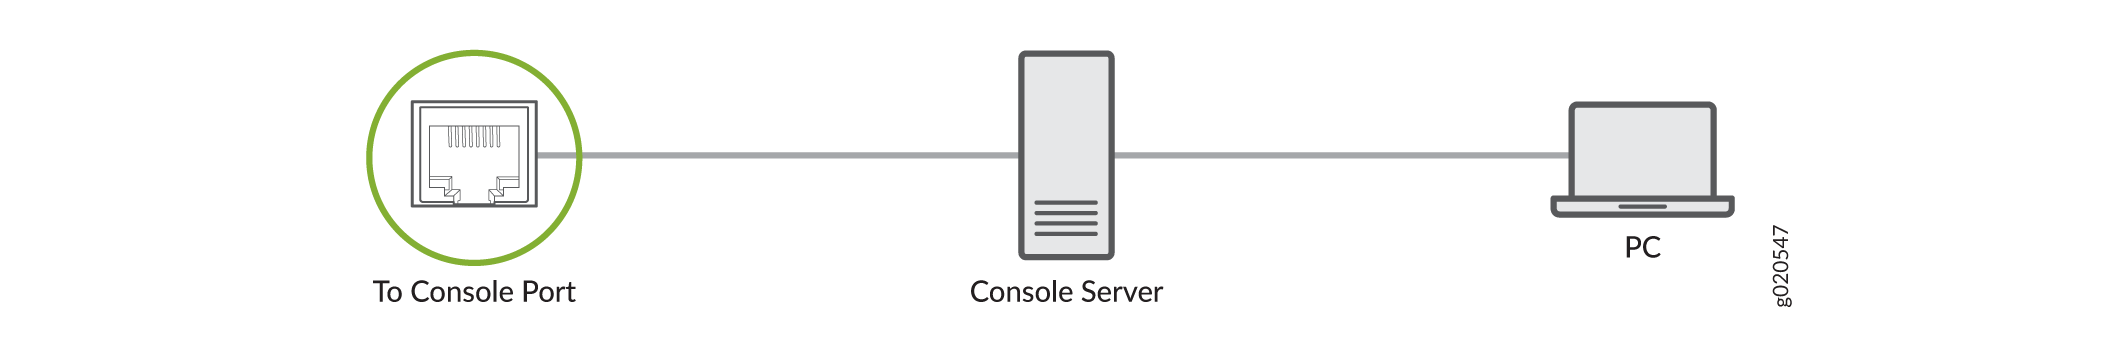 Connecting the ACX7100-32C Router to a Management Console Through a Console Server